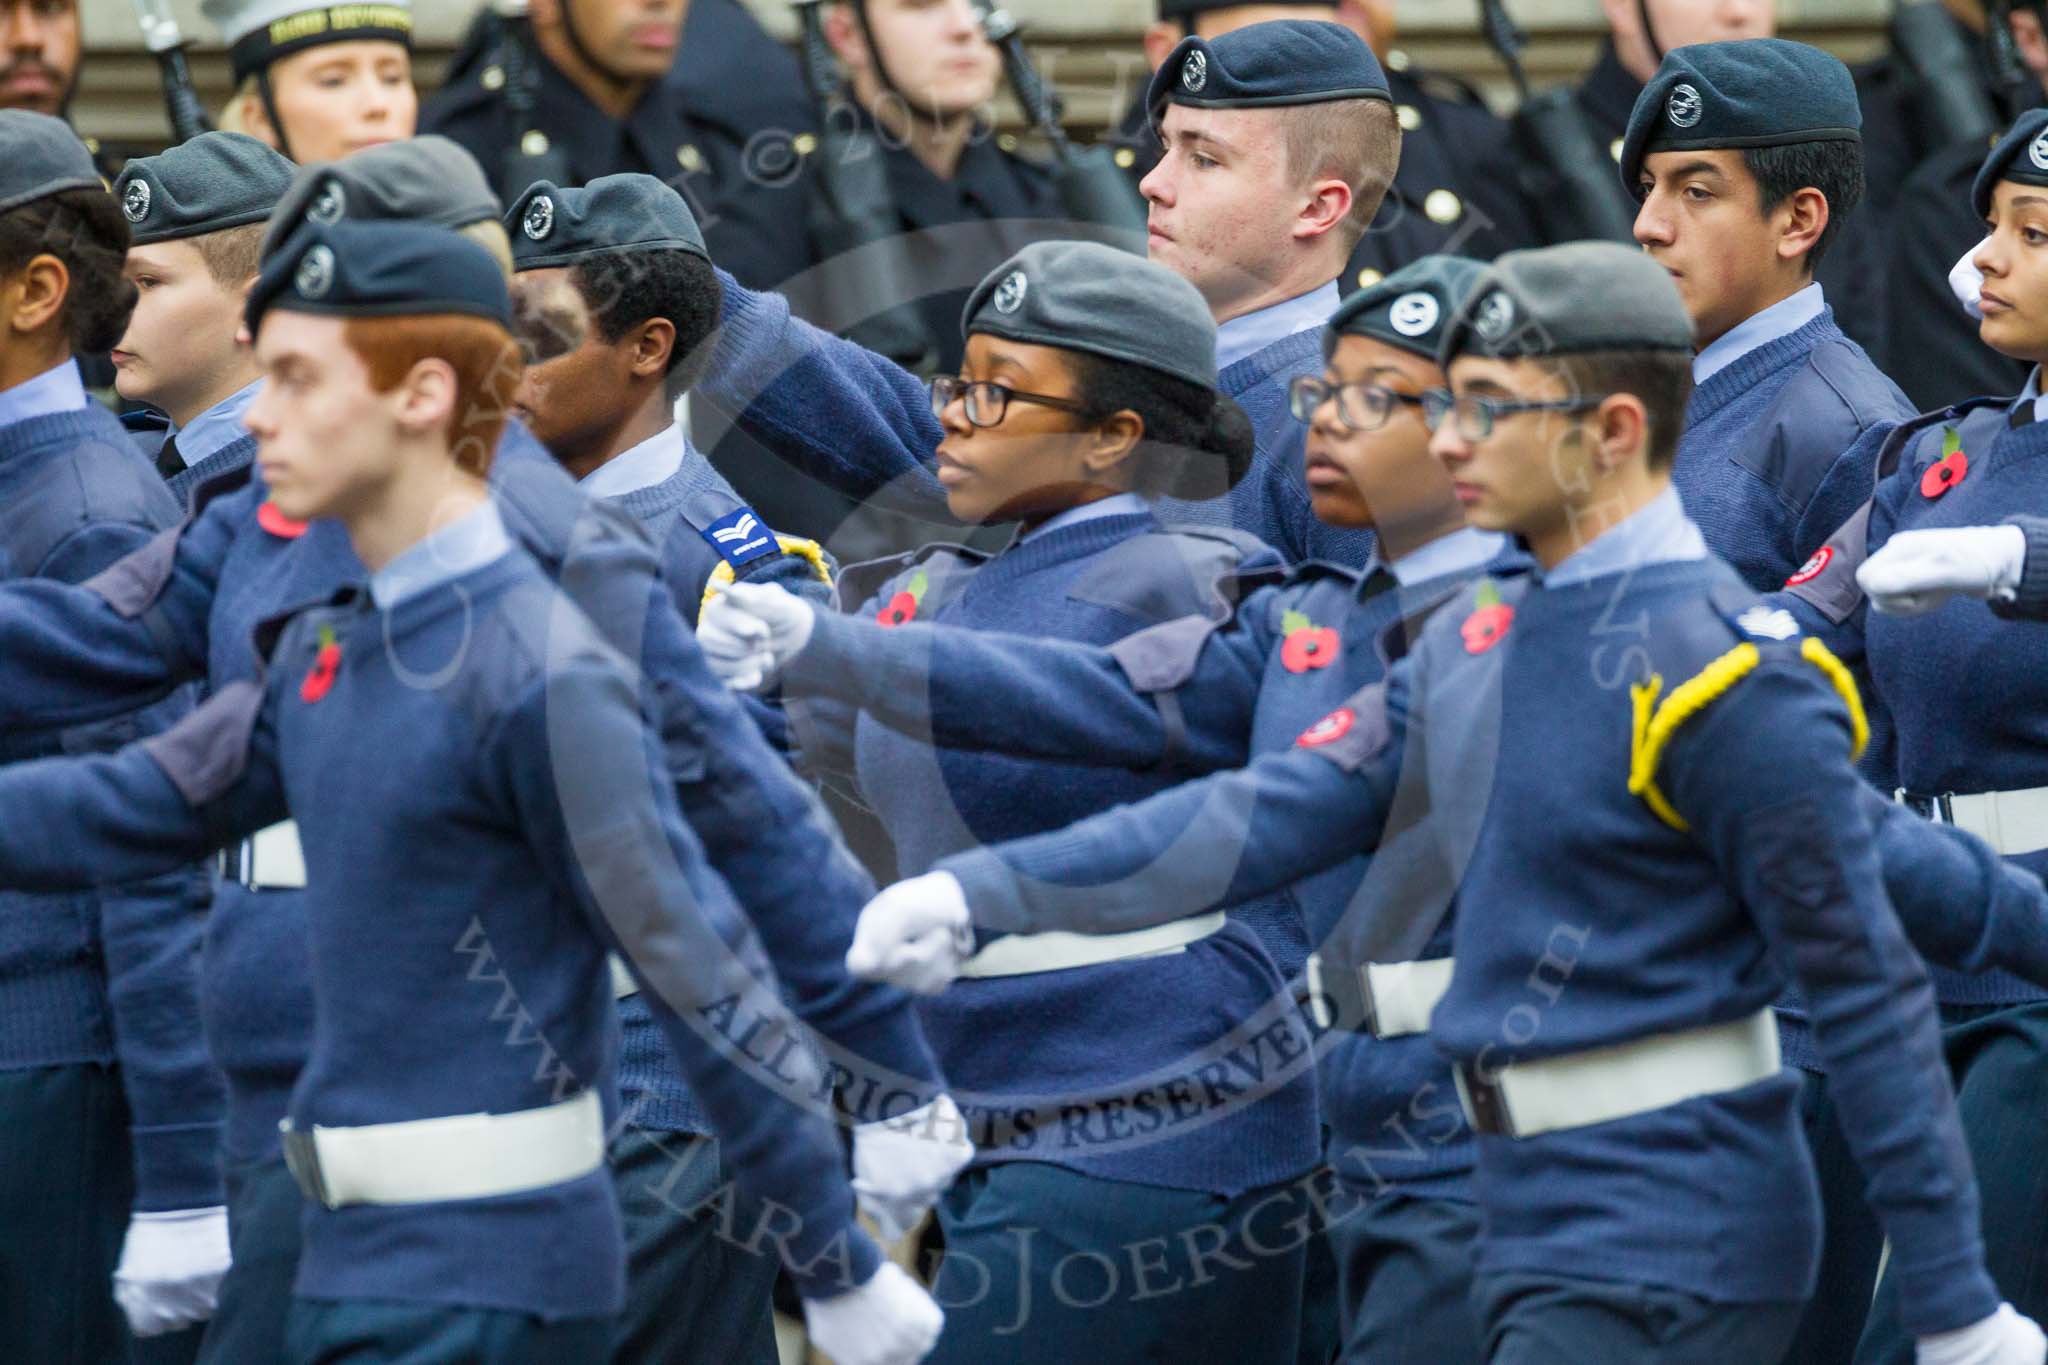 Remembrance Sunday at the Cenotaph 2015: Group M49, Air Training Corps.
Cenotaph, Whitehall, London SW1,
London,
Greater London,
United Kingdom,
on 08 November 2015 at 12:20, image #1715